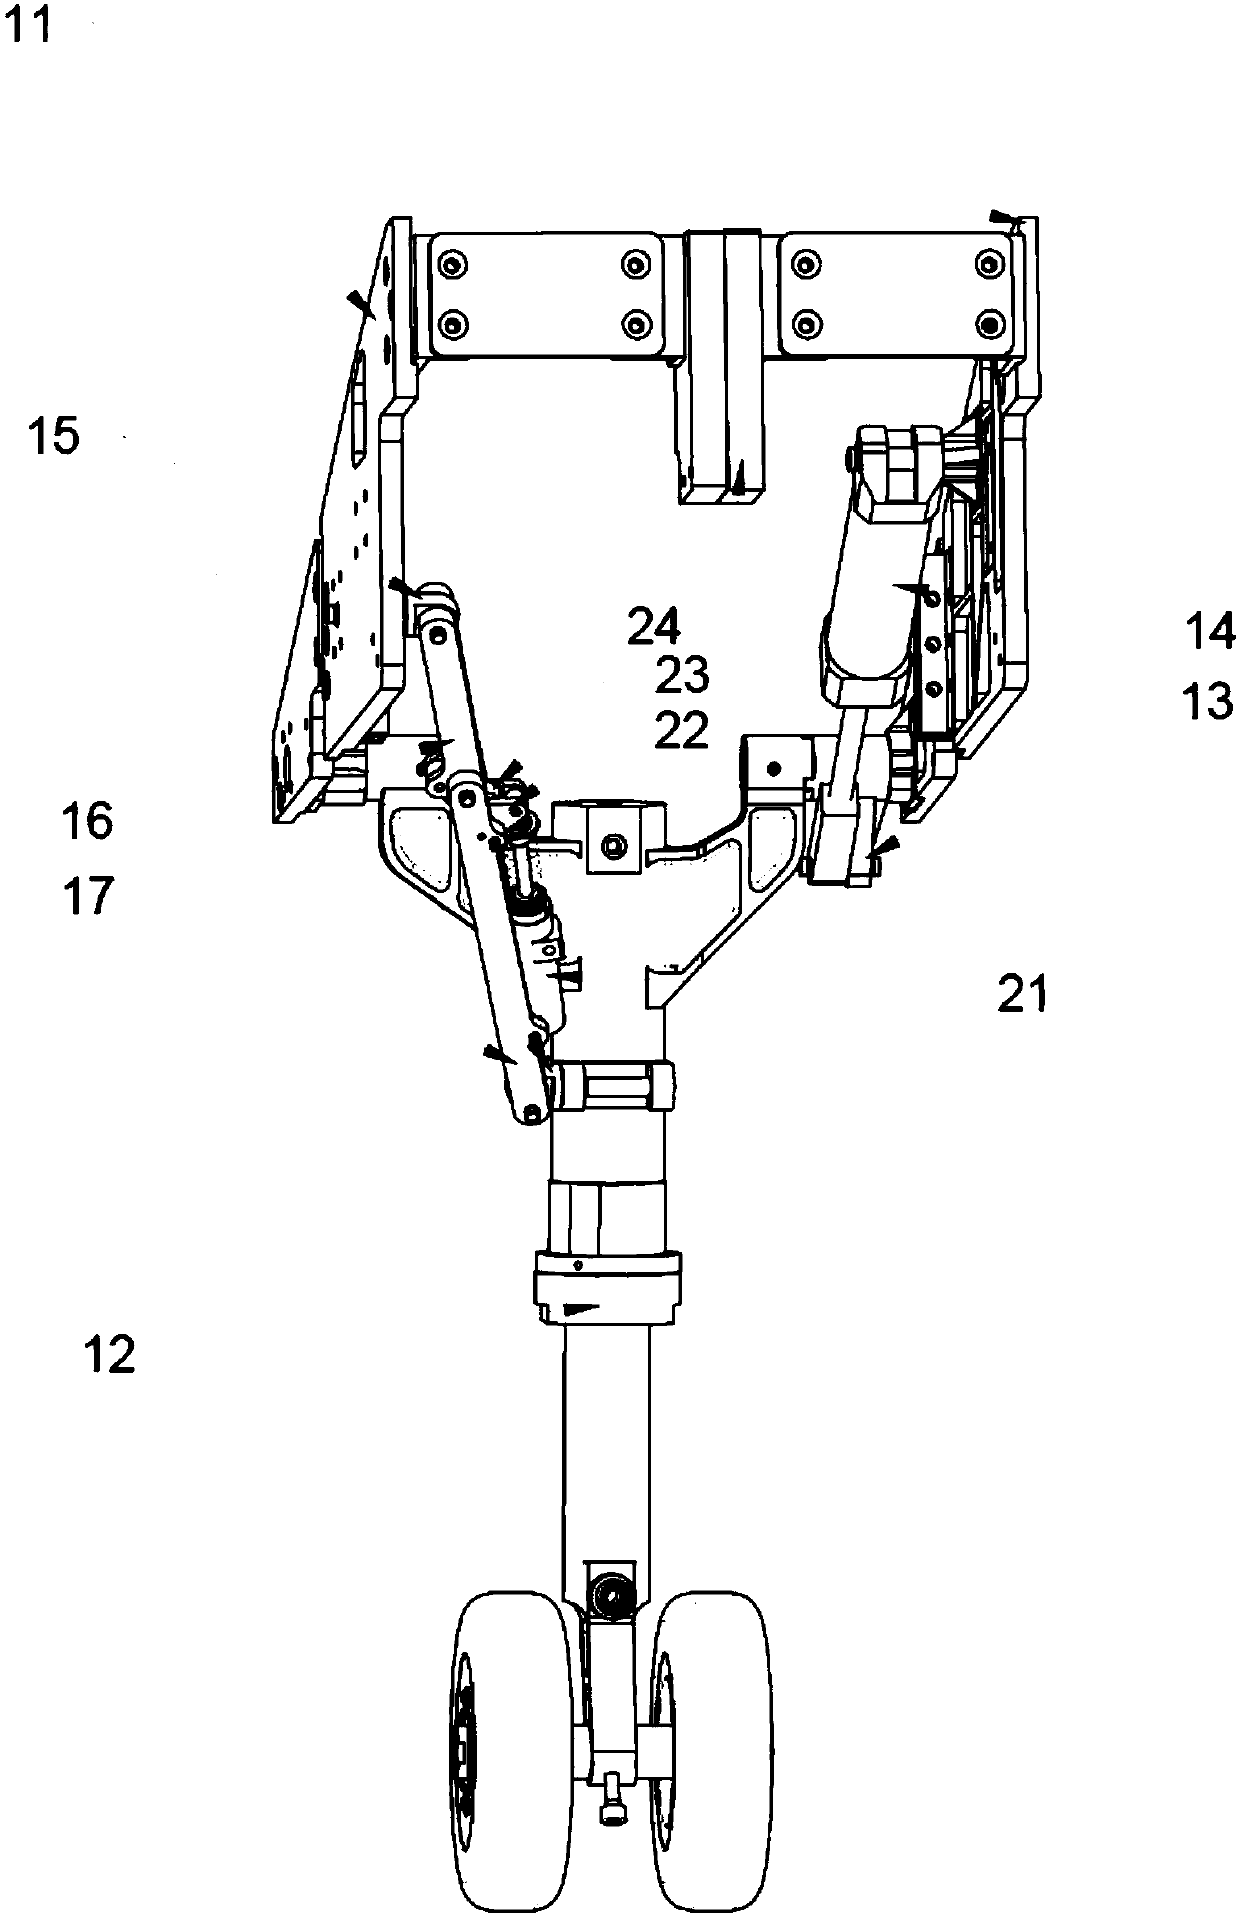 High-reliability unmanned aerial vehicle landing gear extension and retraction system